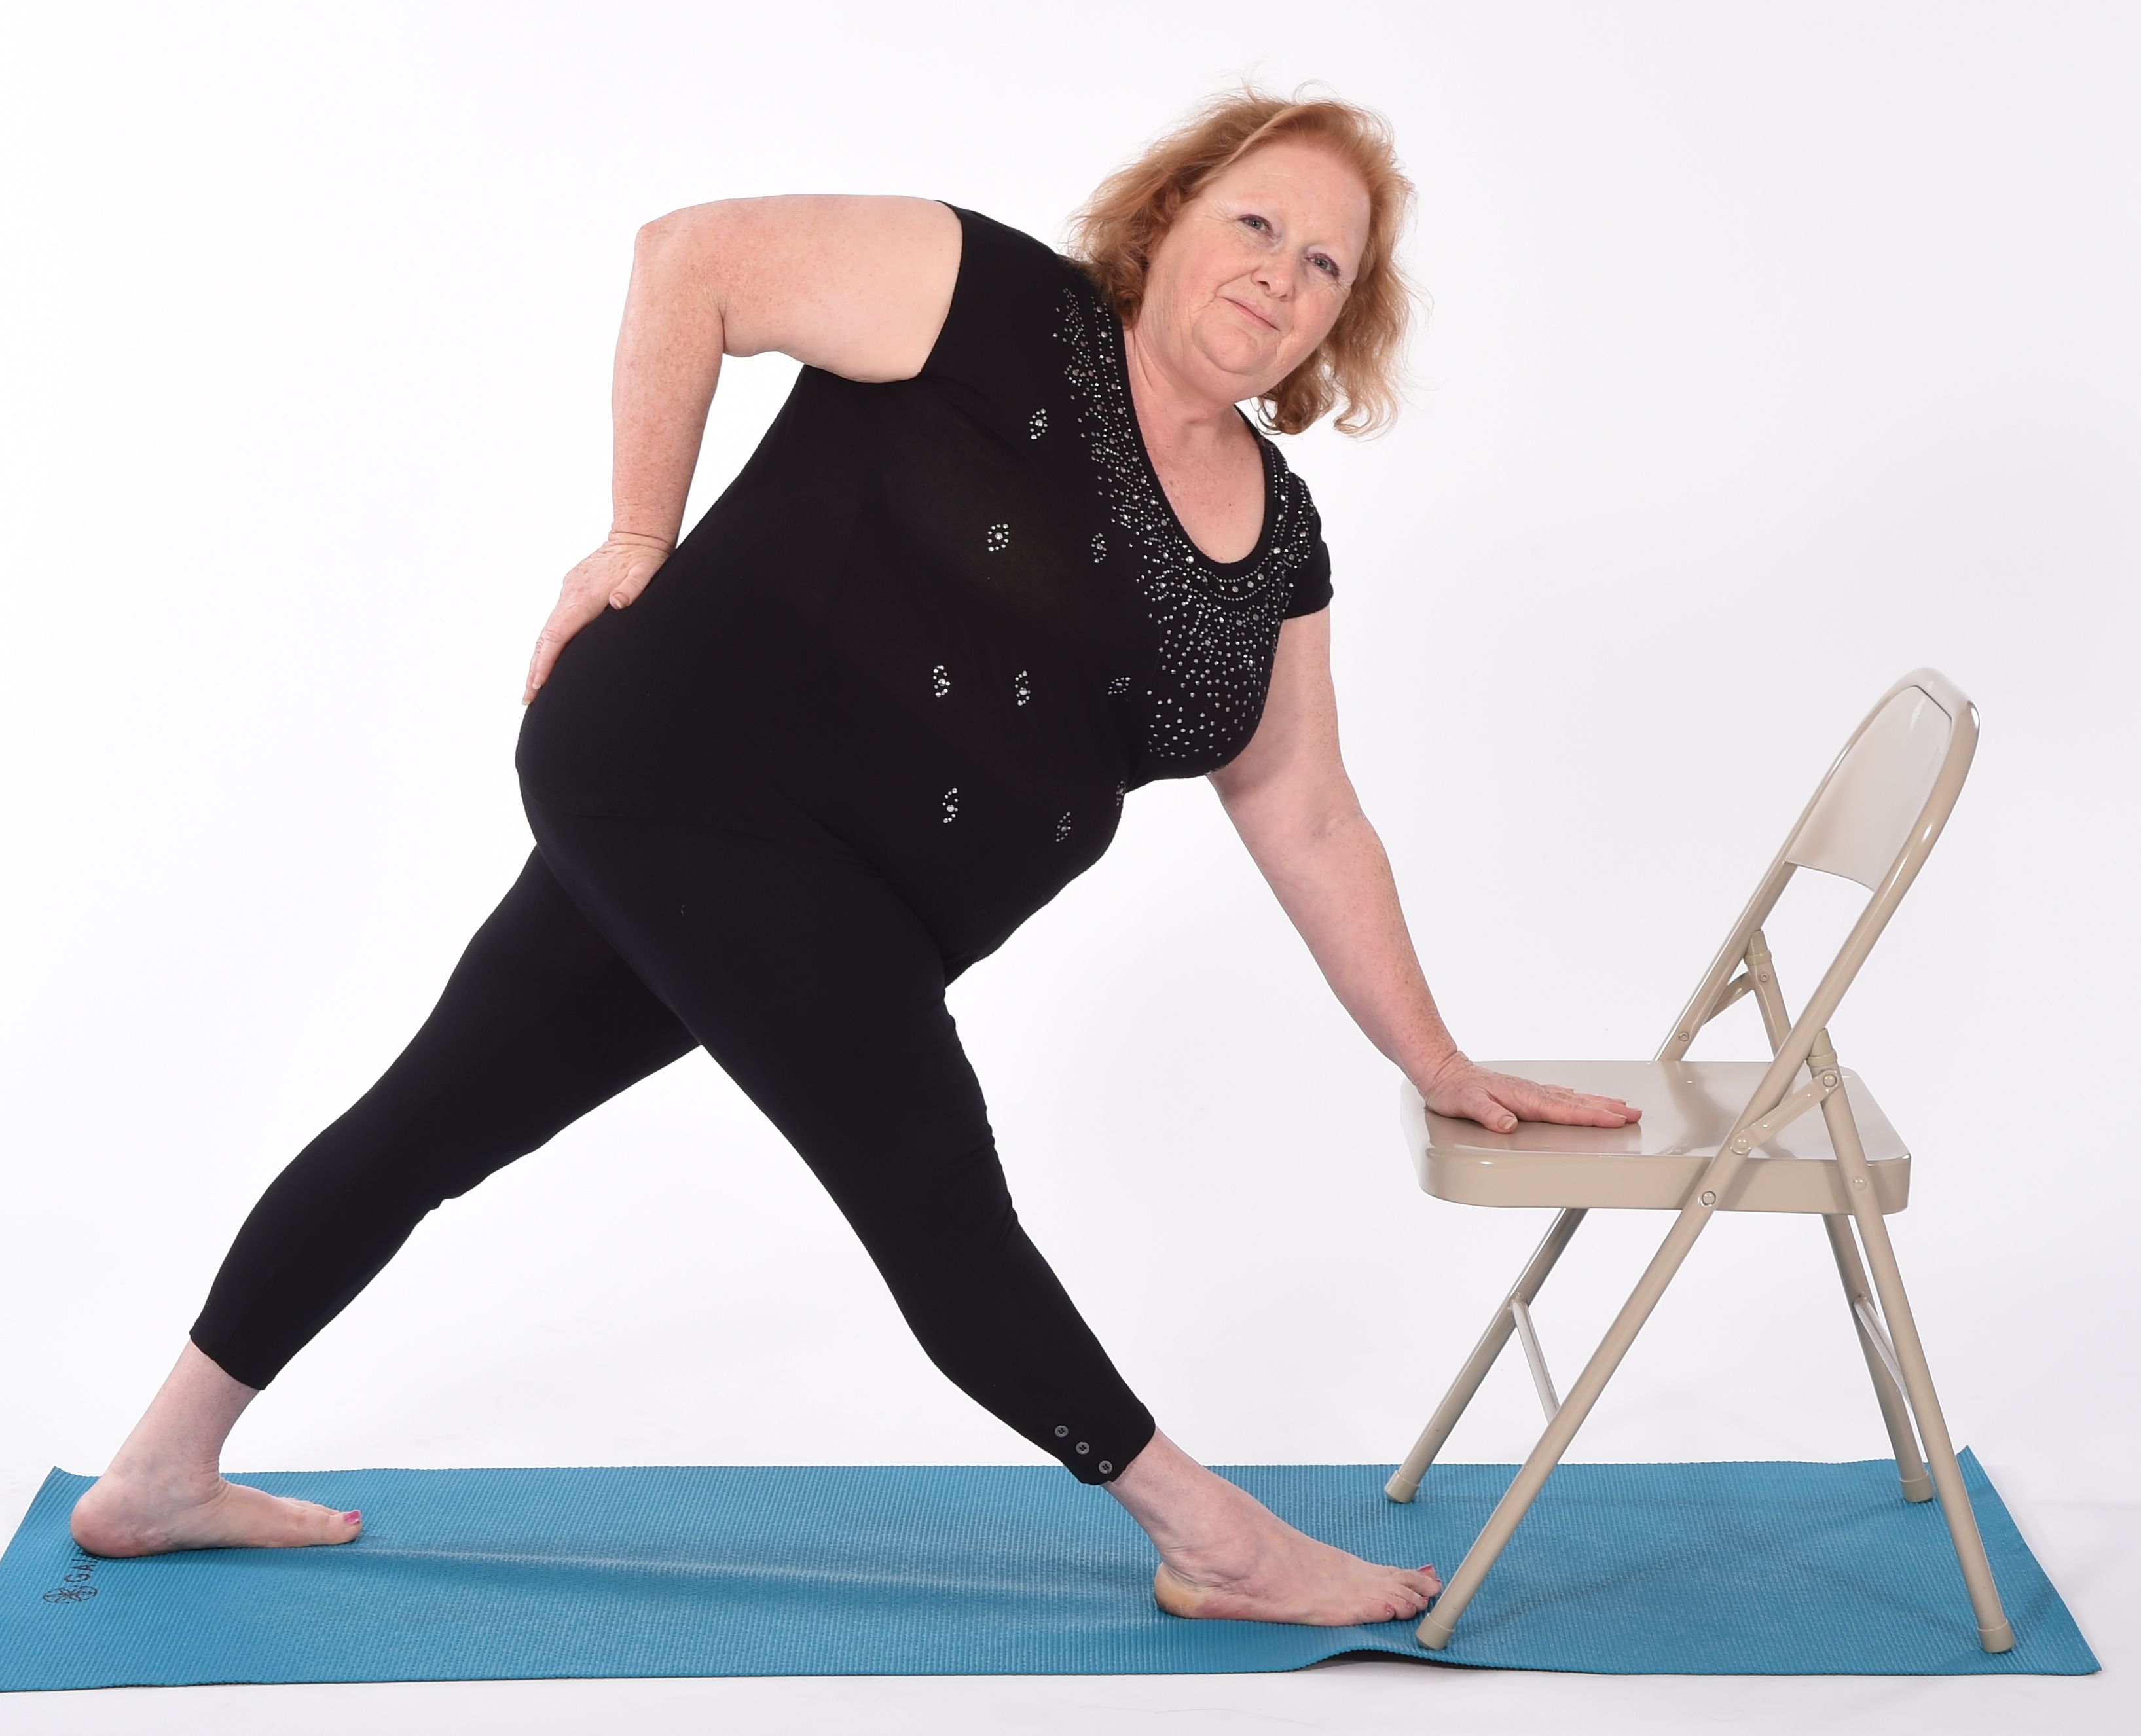 Overweight and Obese Yoga Practitioners have a Higher Quality of